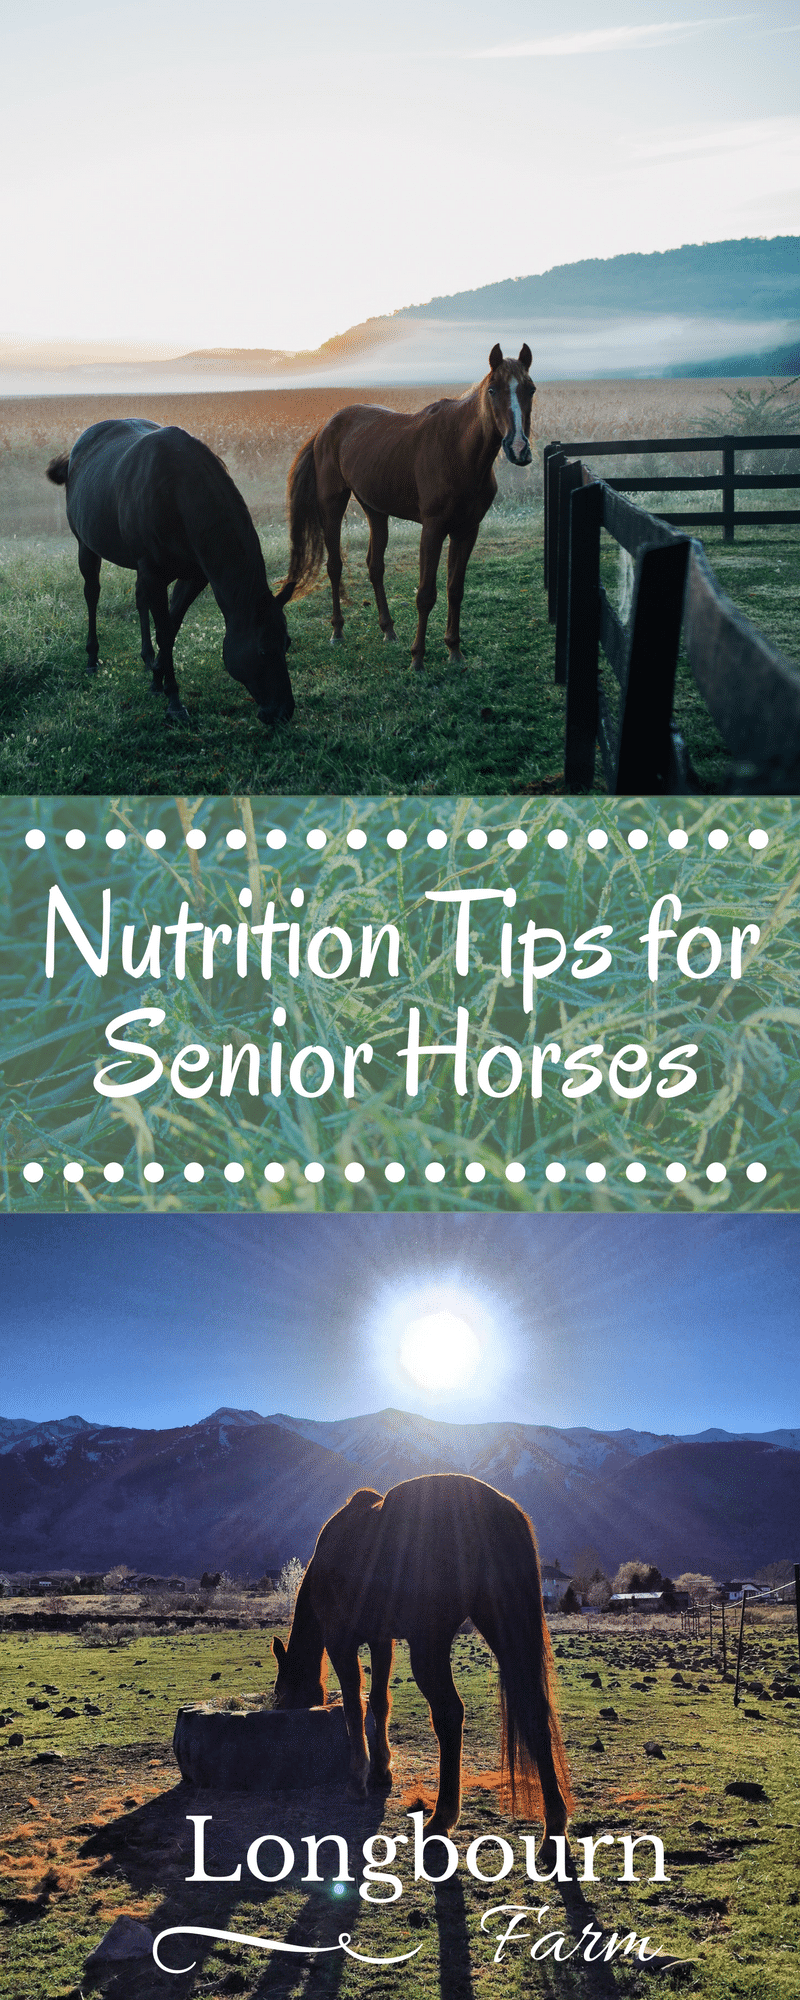 Having trouble keeping your senior horse in good condition? Get nutrition tips for senior horses in this article! Keep your aging horse healthy and happy!